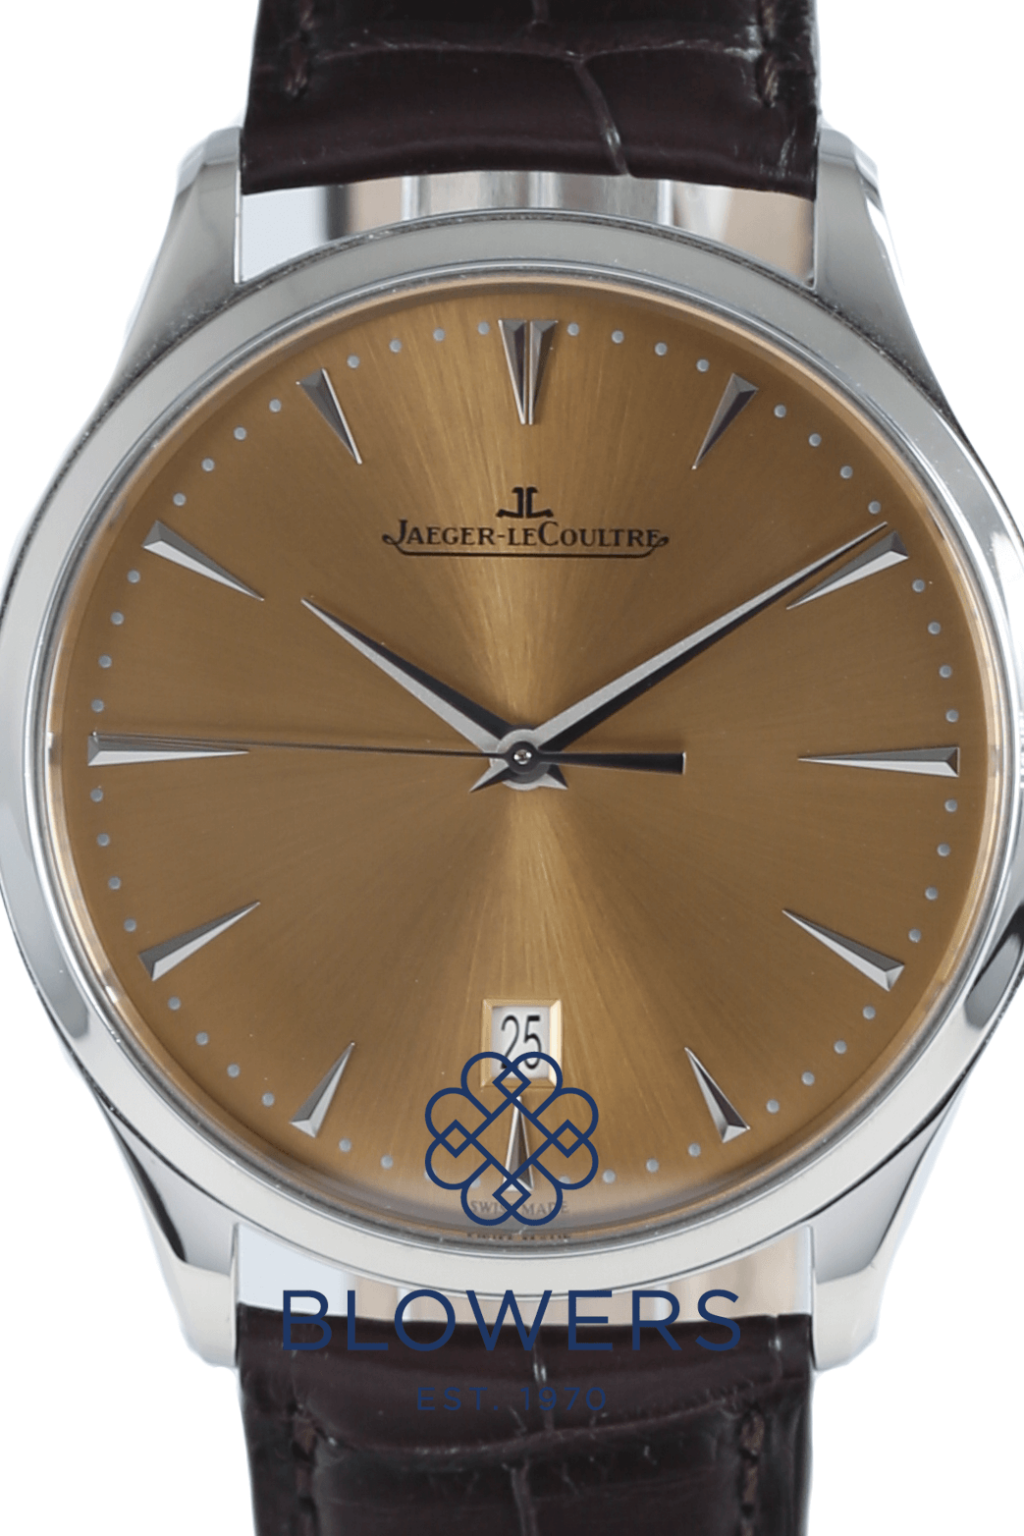 Jaeger LeCoultre Watches | Blowers Jewellers